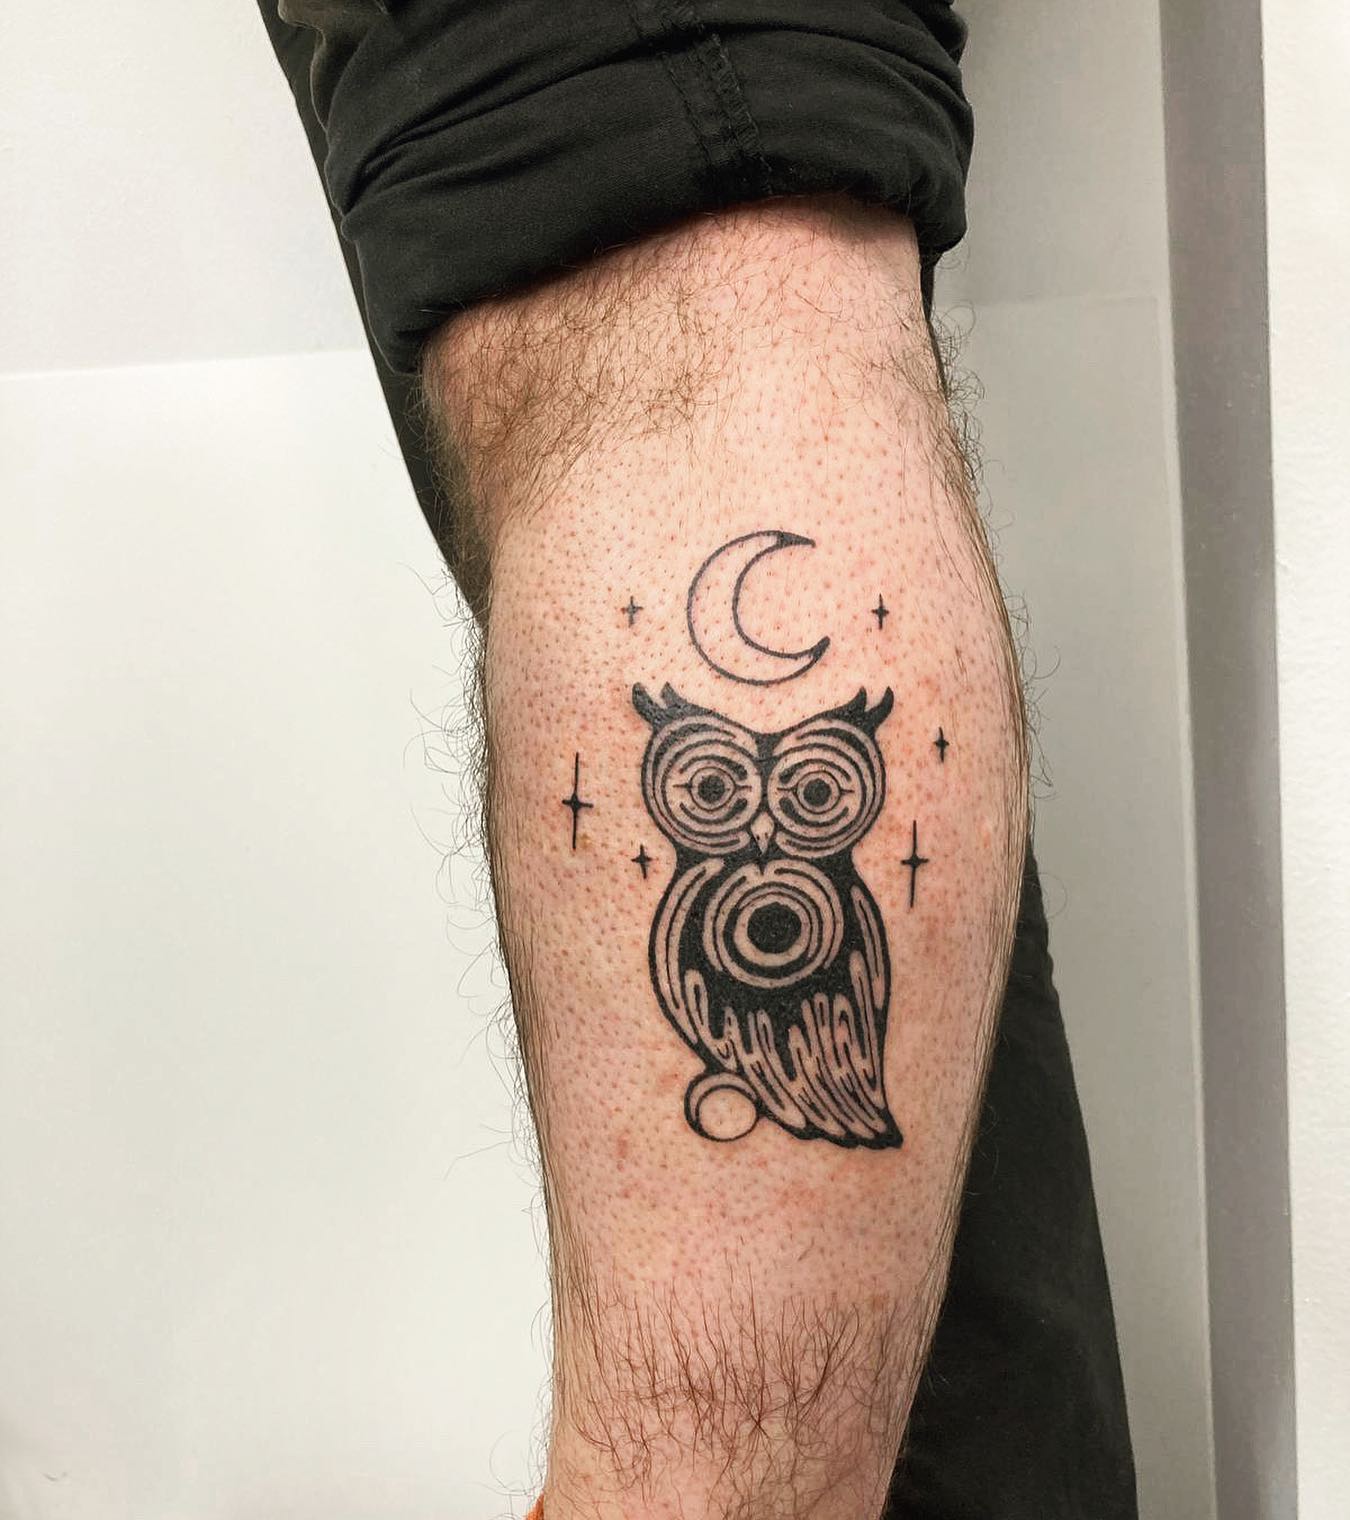 Owl Tattoos: 30+ Design Ideas, Meaning and Symbolism - 100 Tattoos